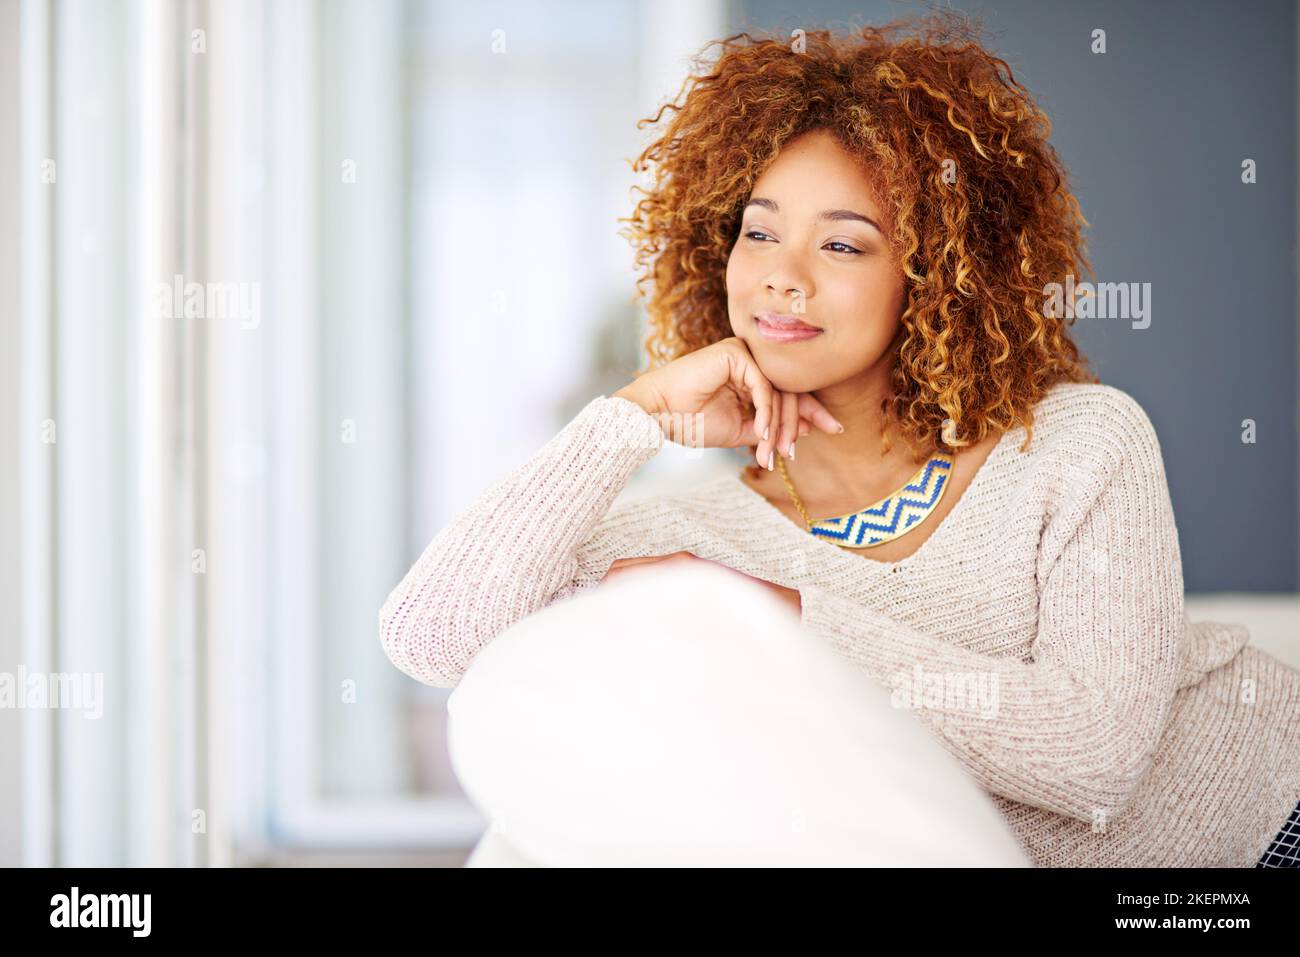 Time alone is all I need right now. a young woman relaxing at home on the weekend. Stock Photo